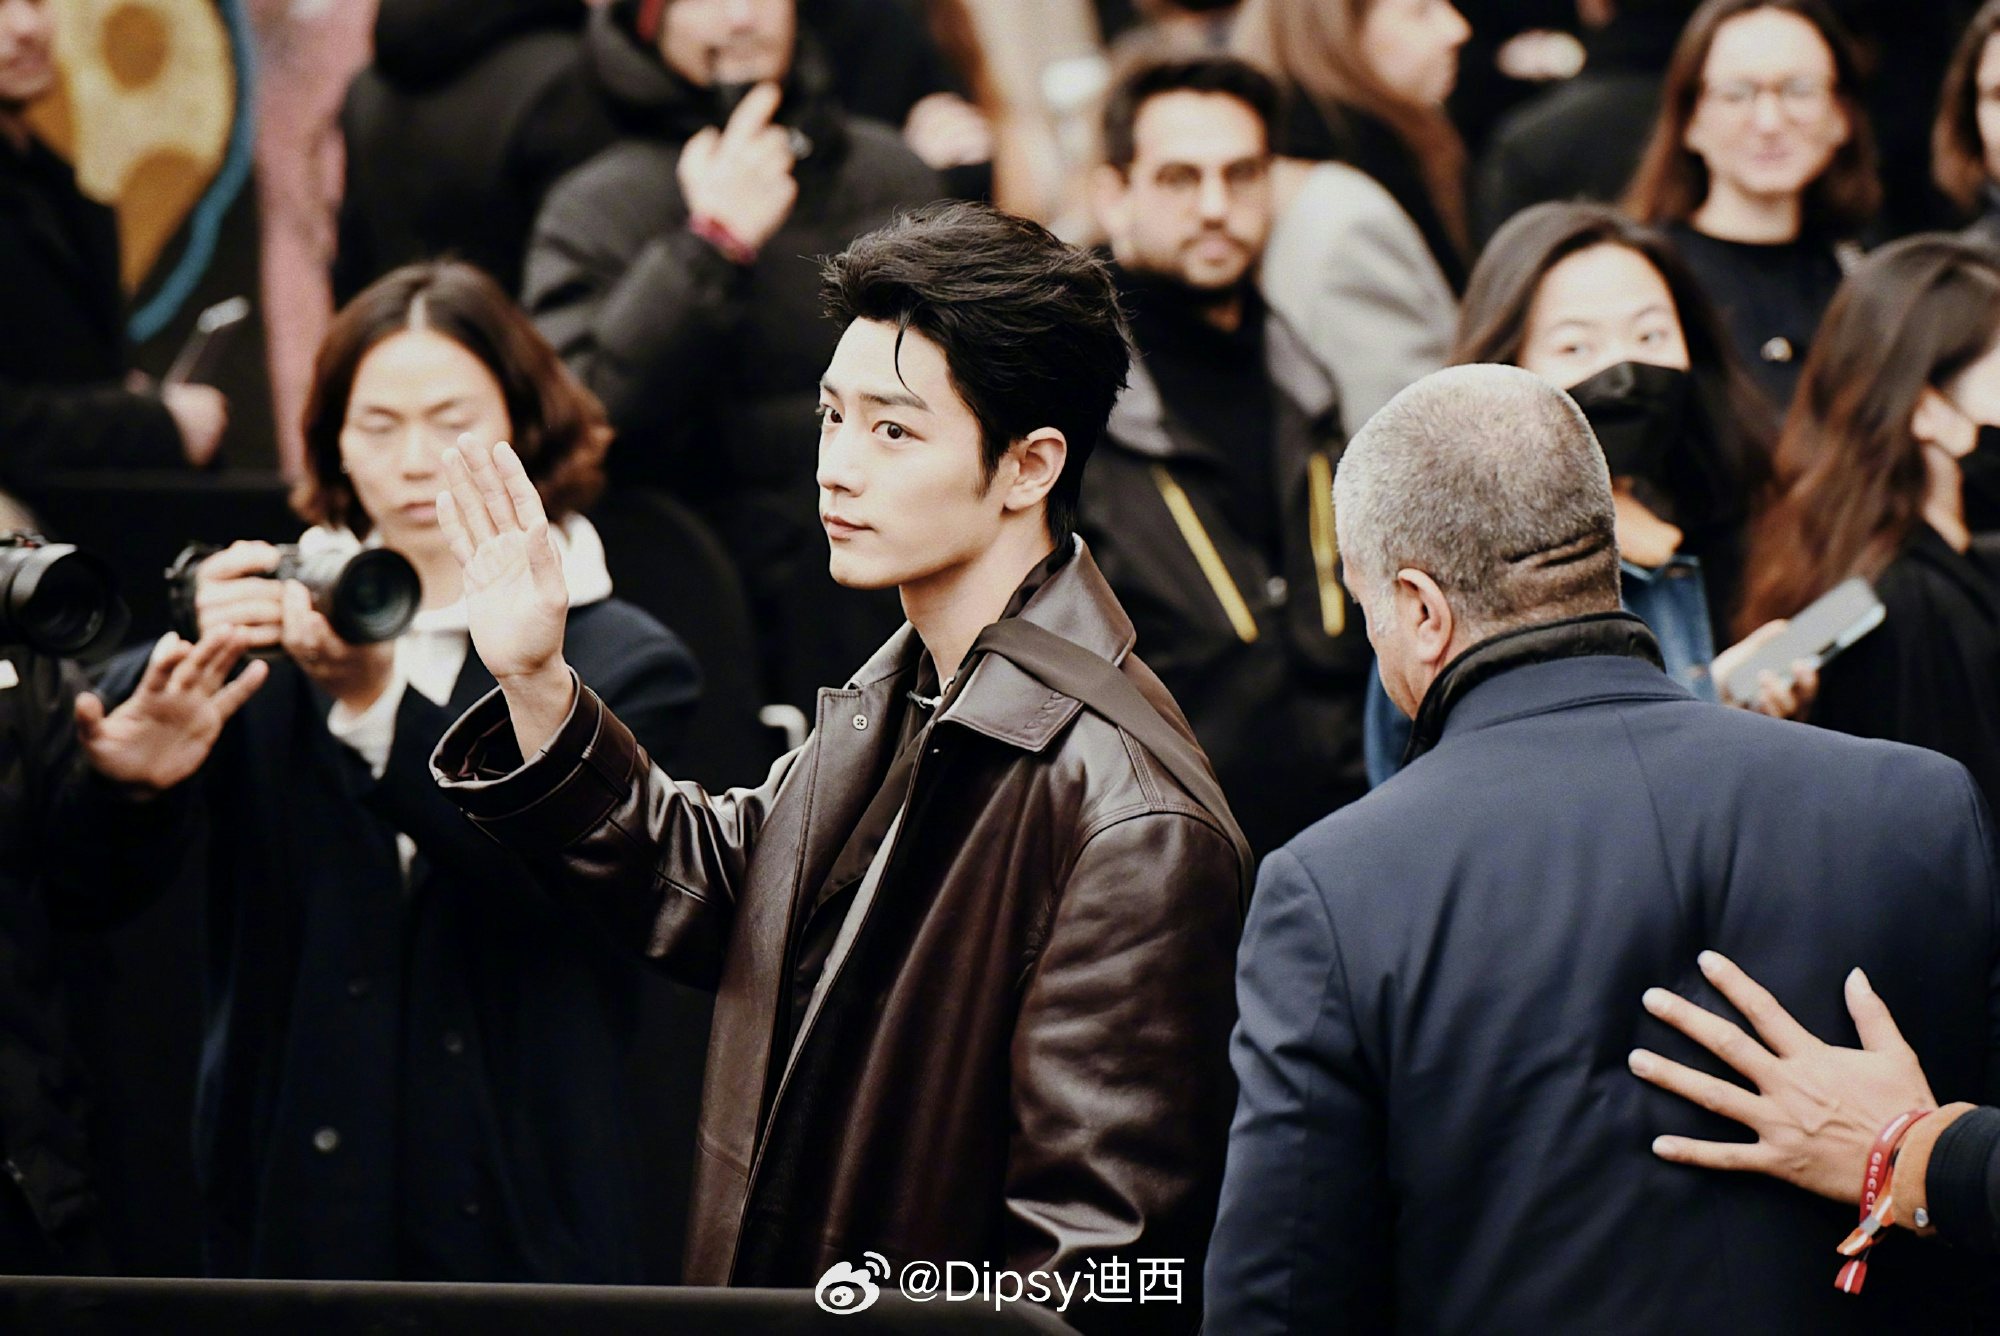 Xiao Zhan arriving at Gucci’s show. Image: Dipsy迪西's Weibo